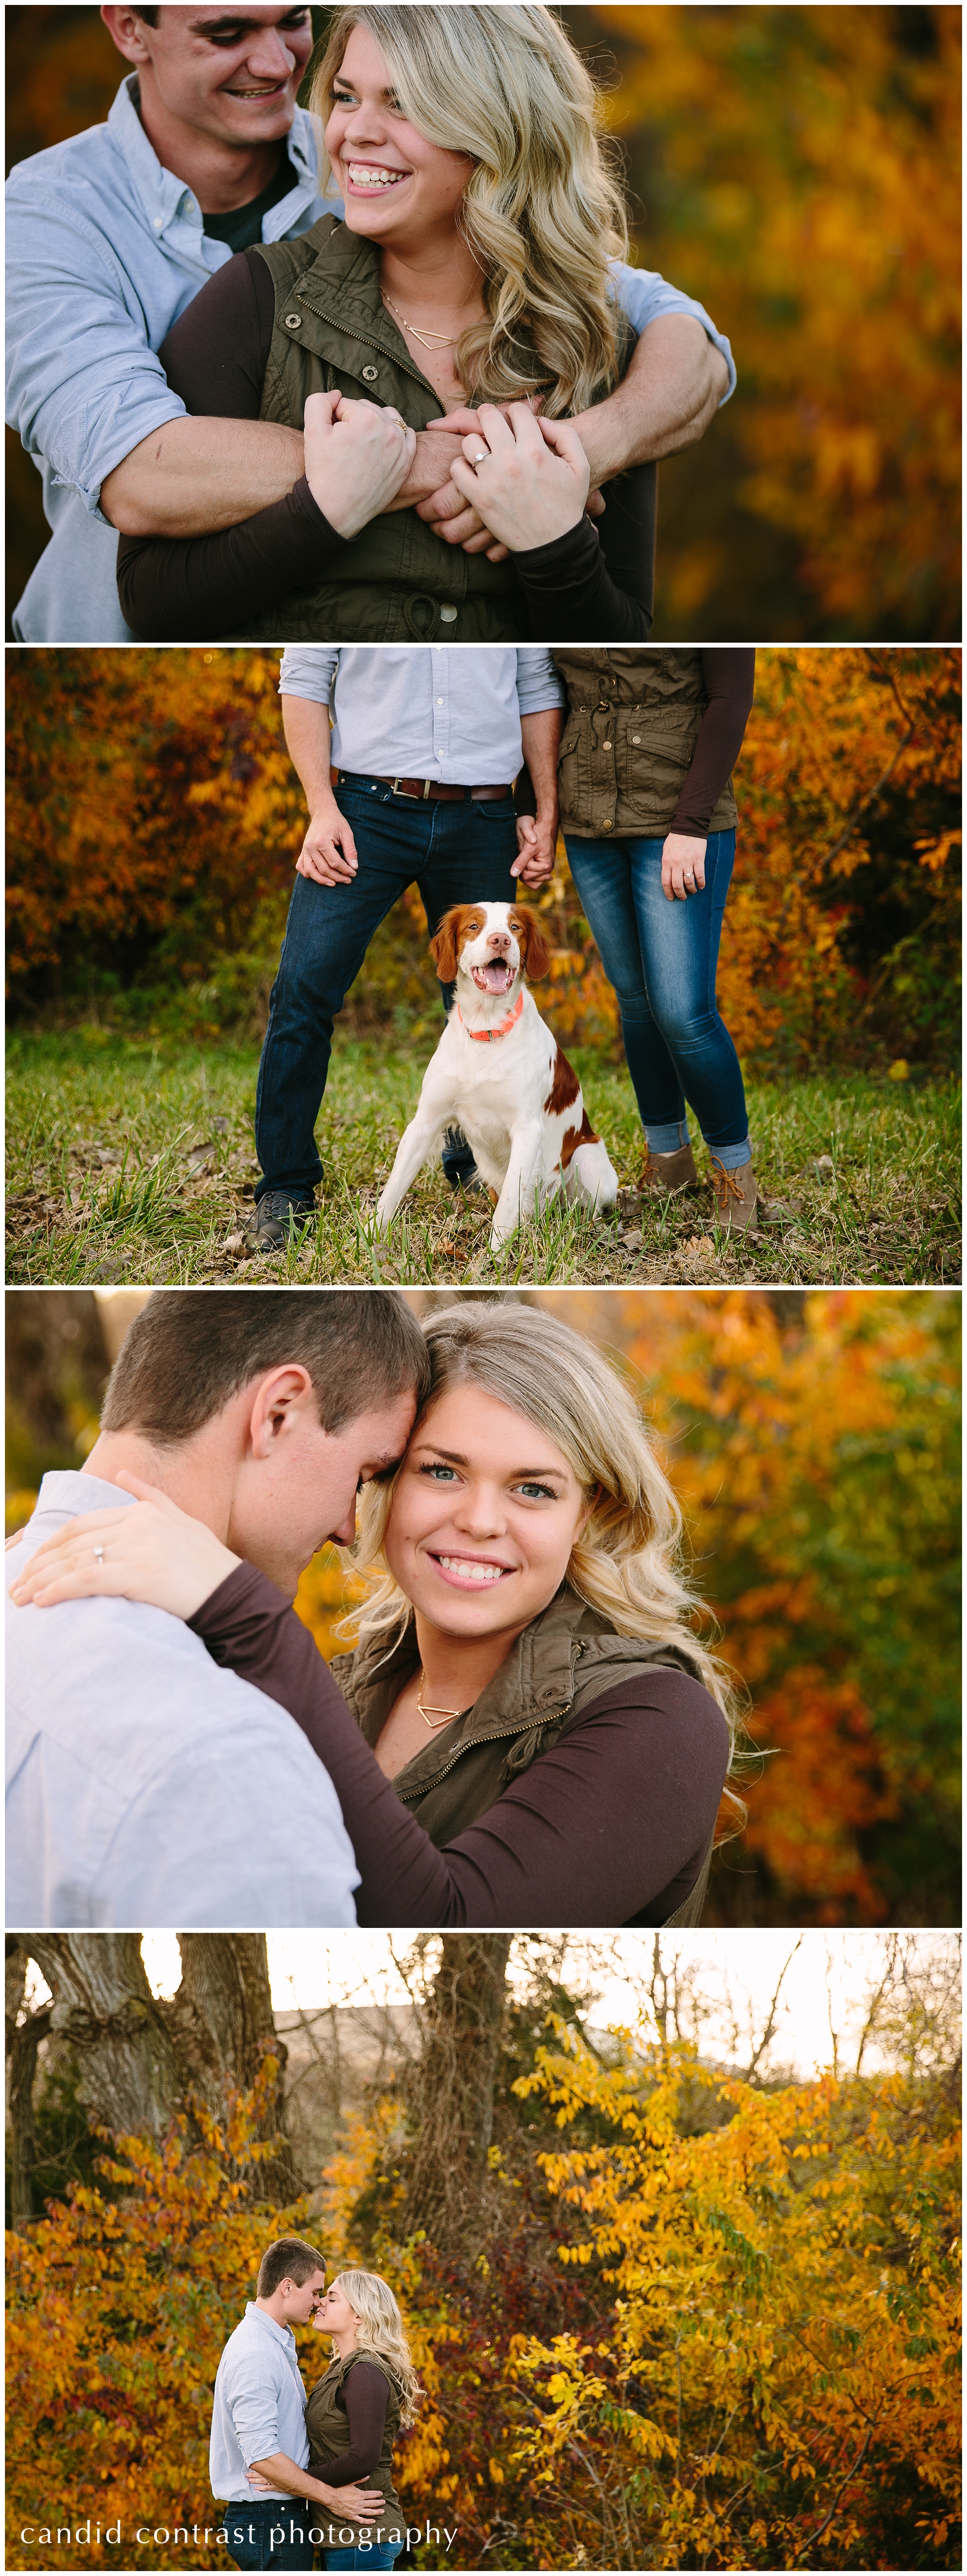 dubuque iowa wedding photographer, fall engagement photos with dog, candid contrast photography